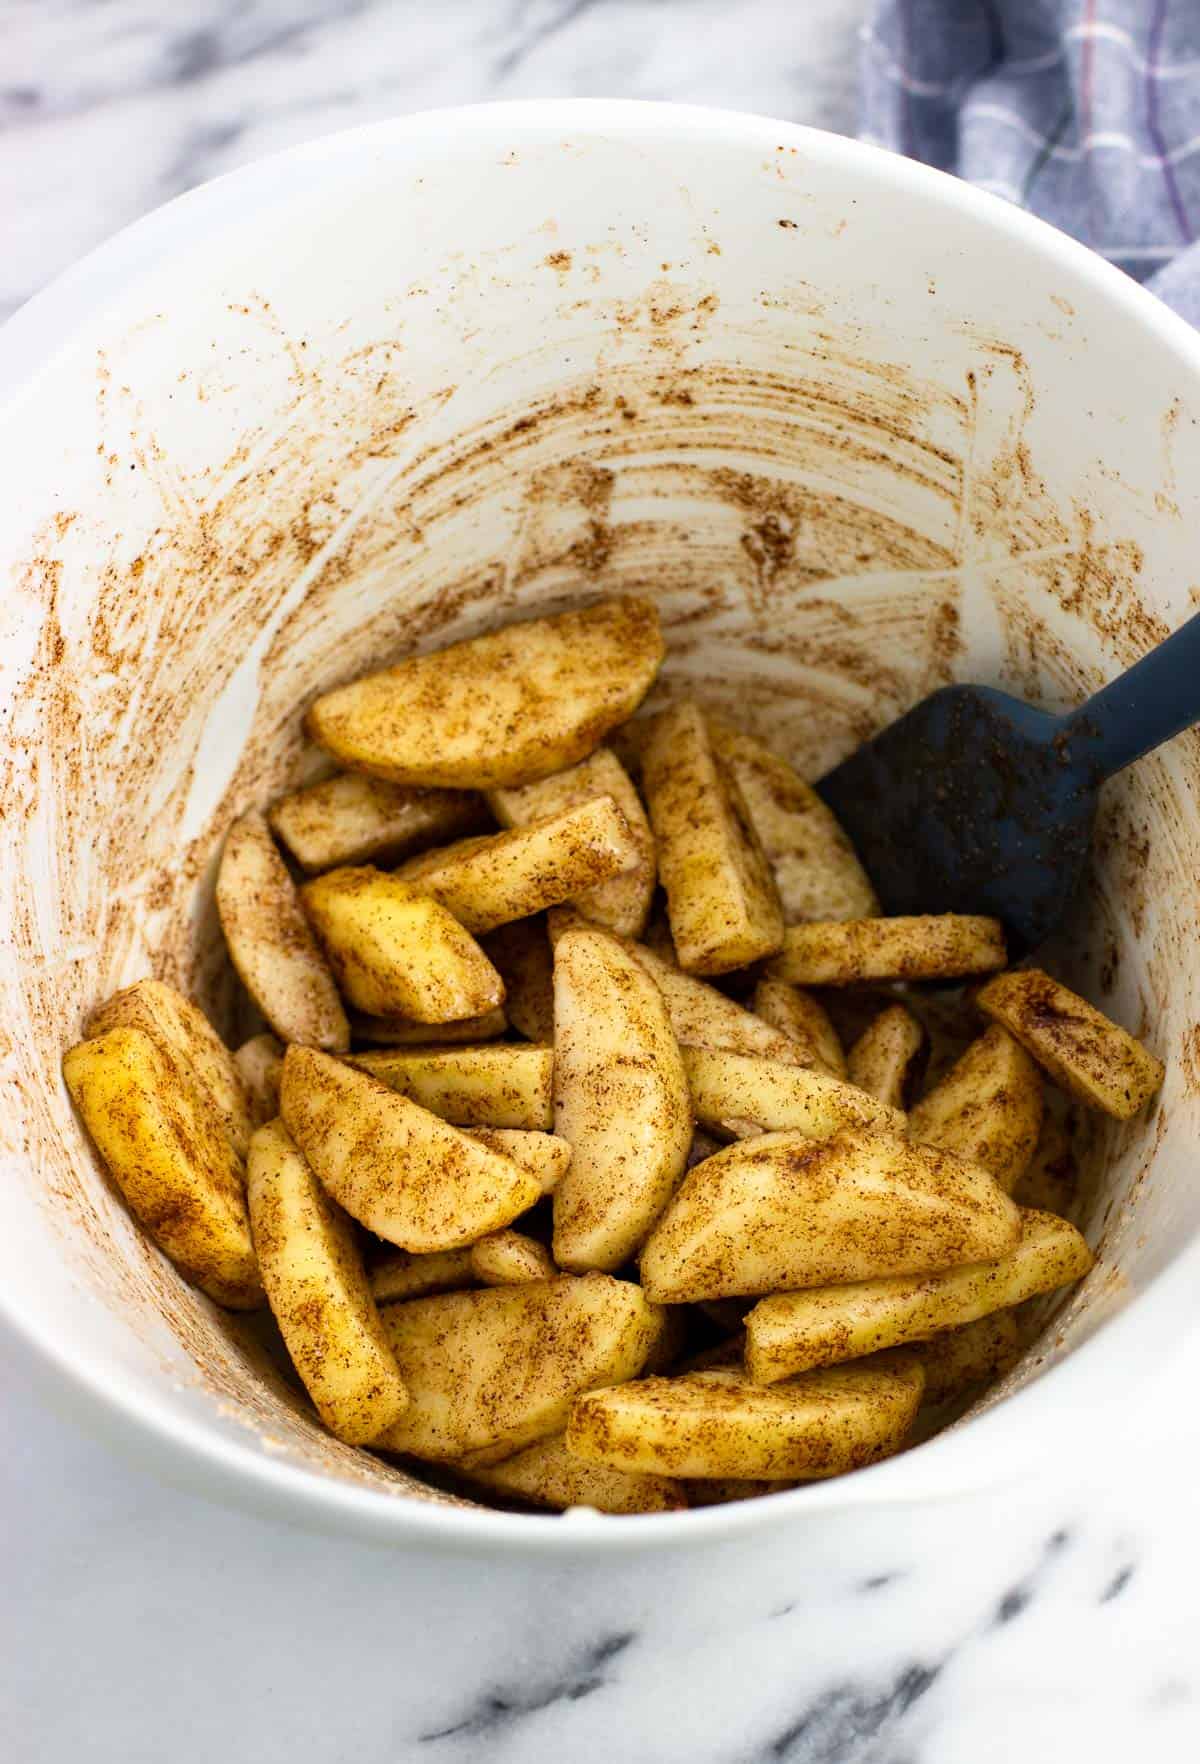 Raw apple slices coated with oil, sugar, and spices in a mixing bowl.